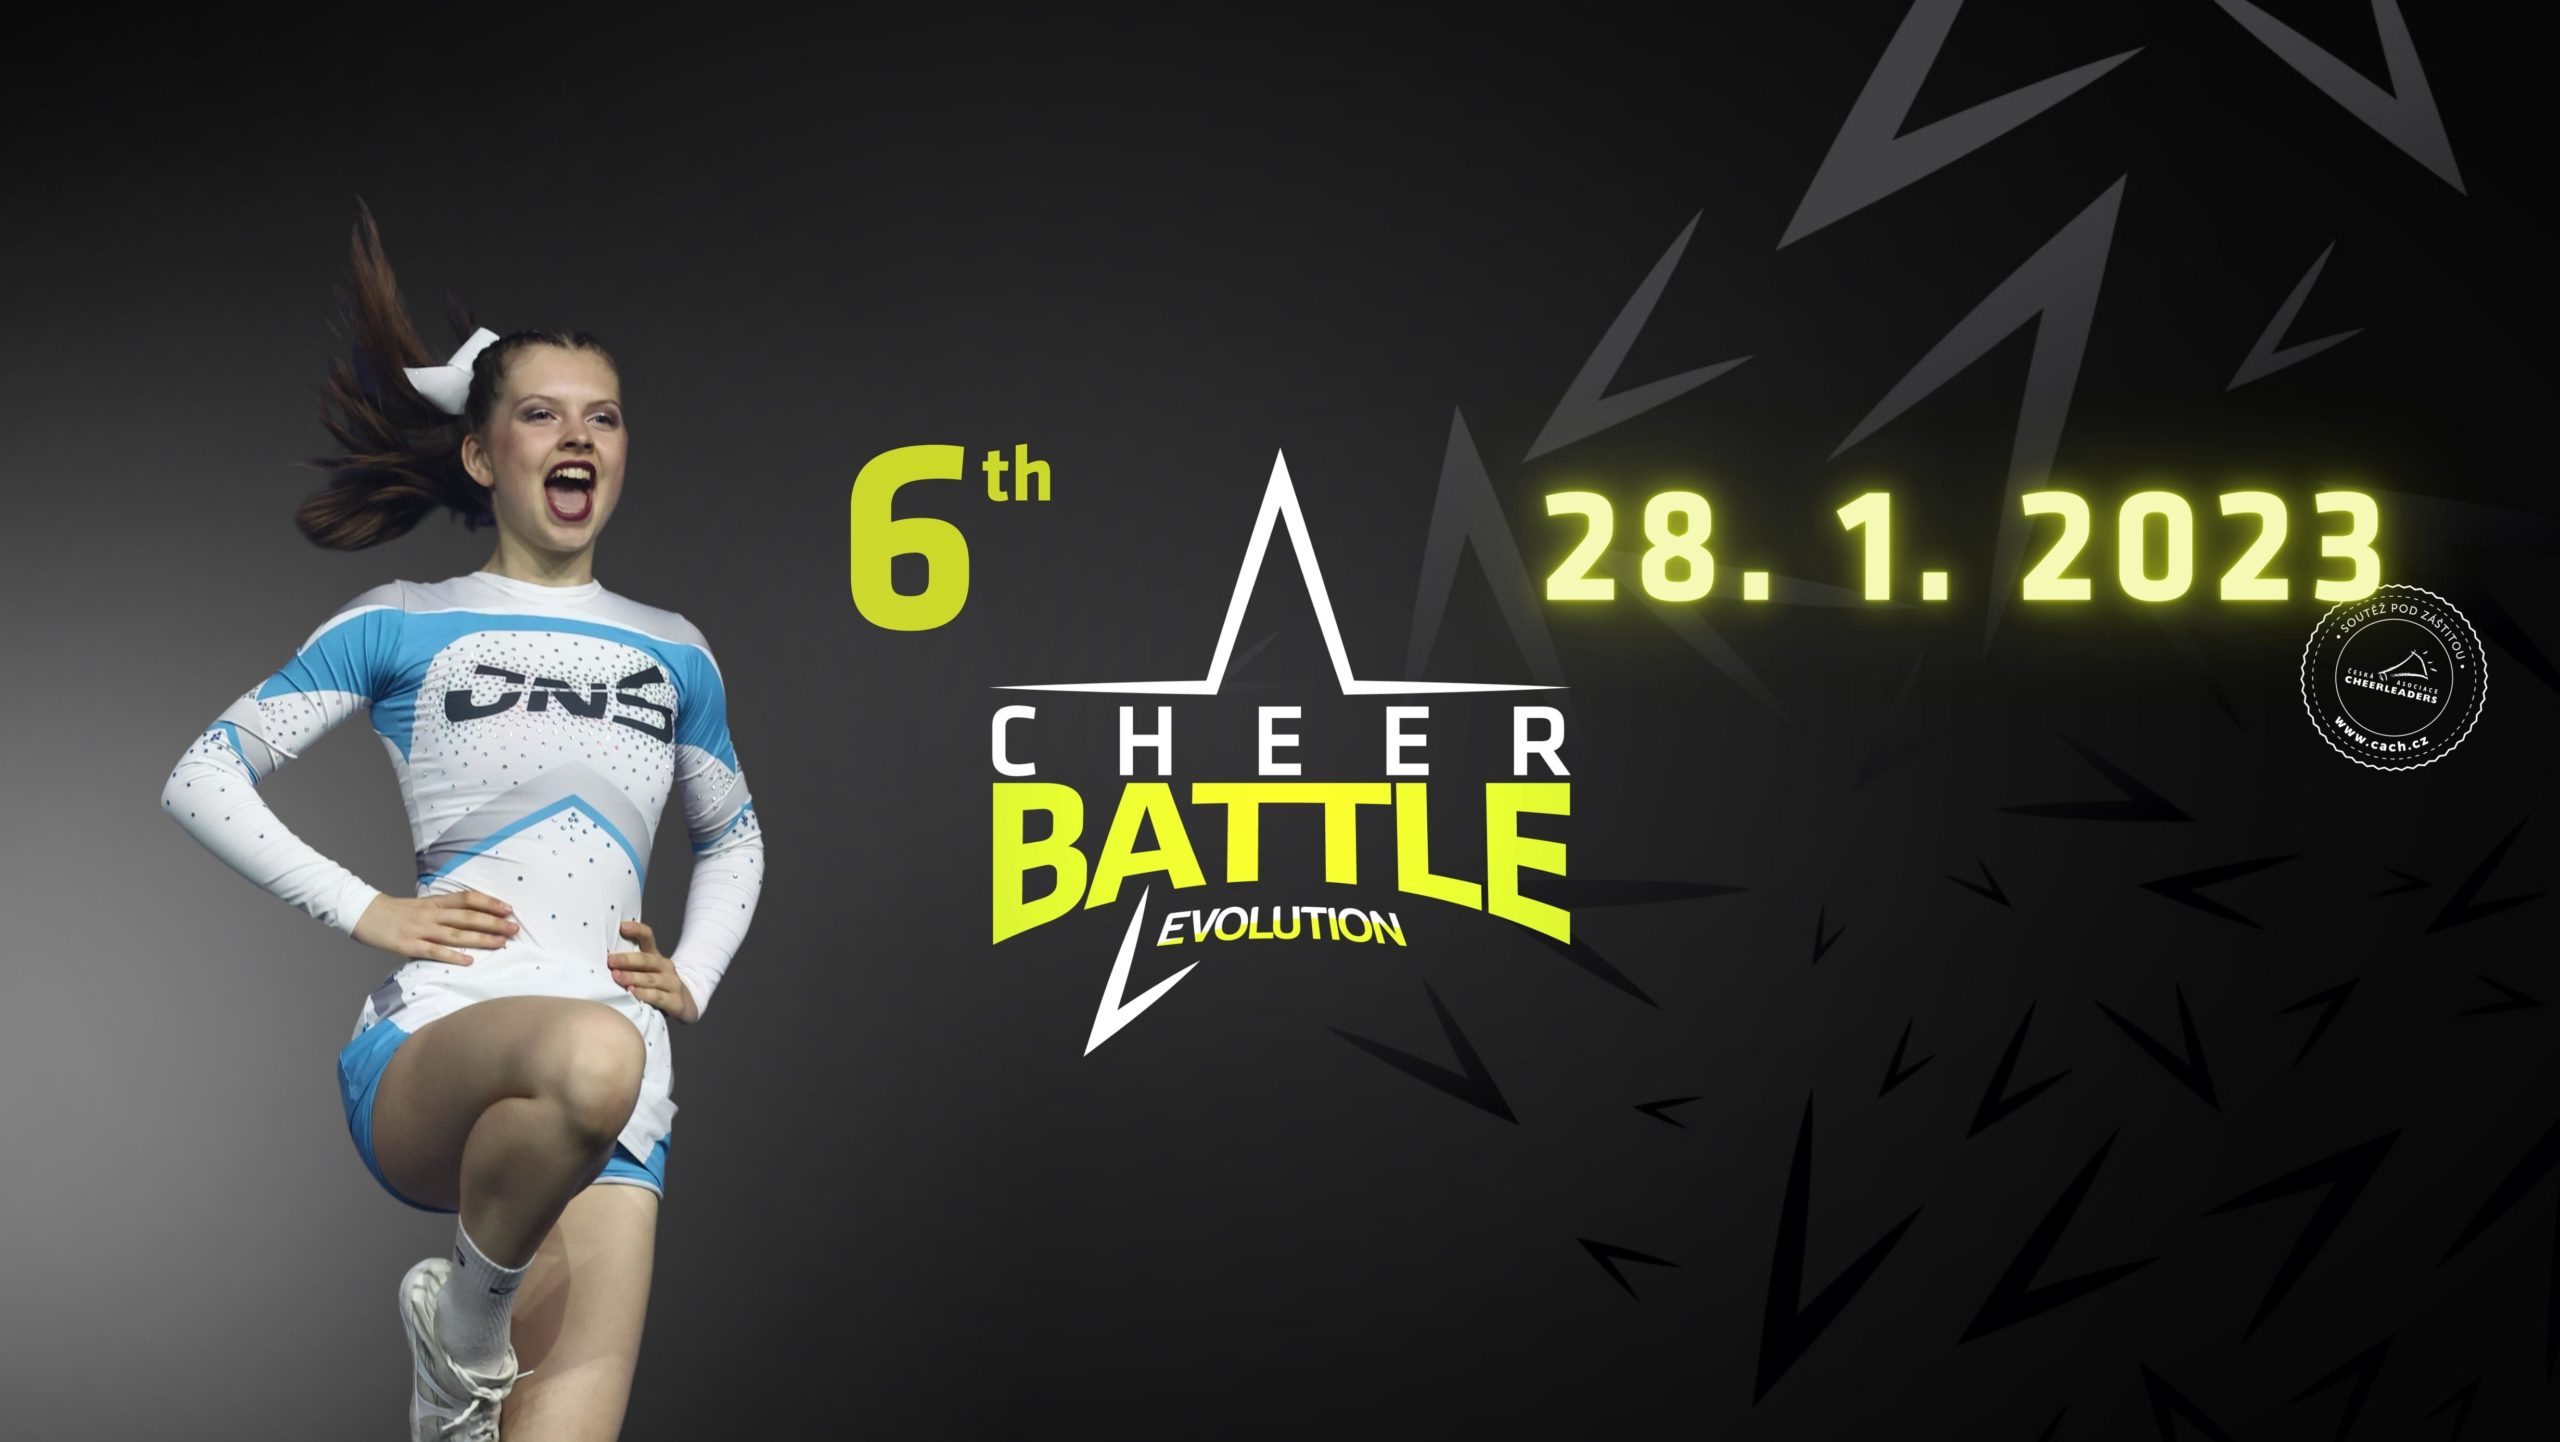 Cheer Battle is back!